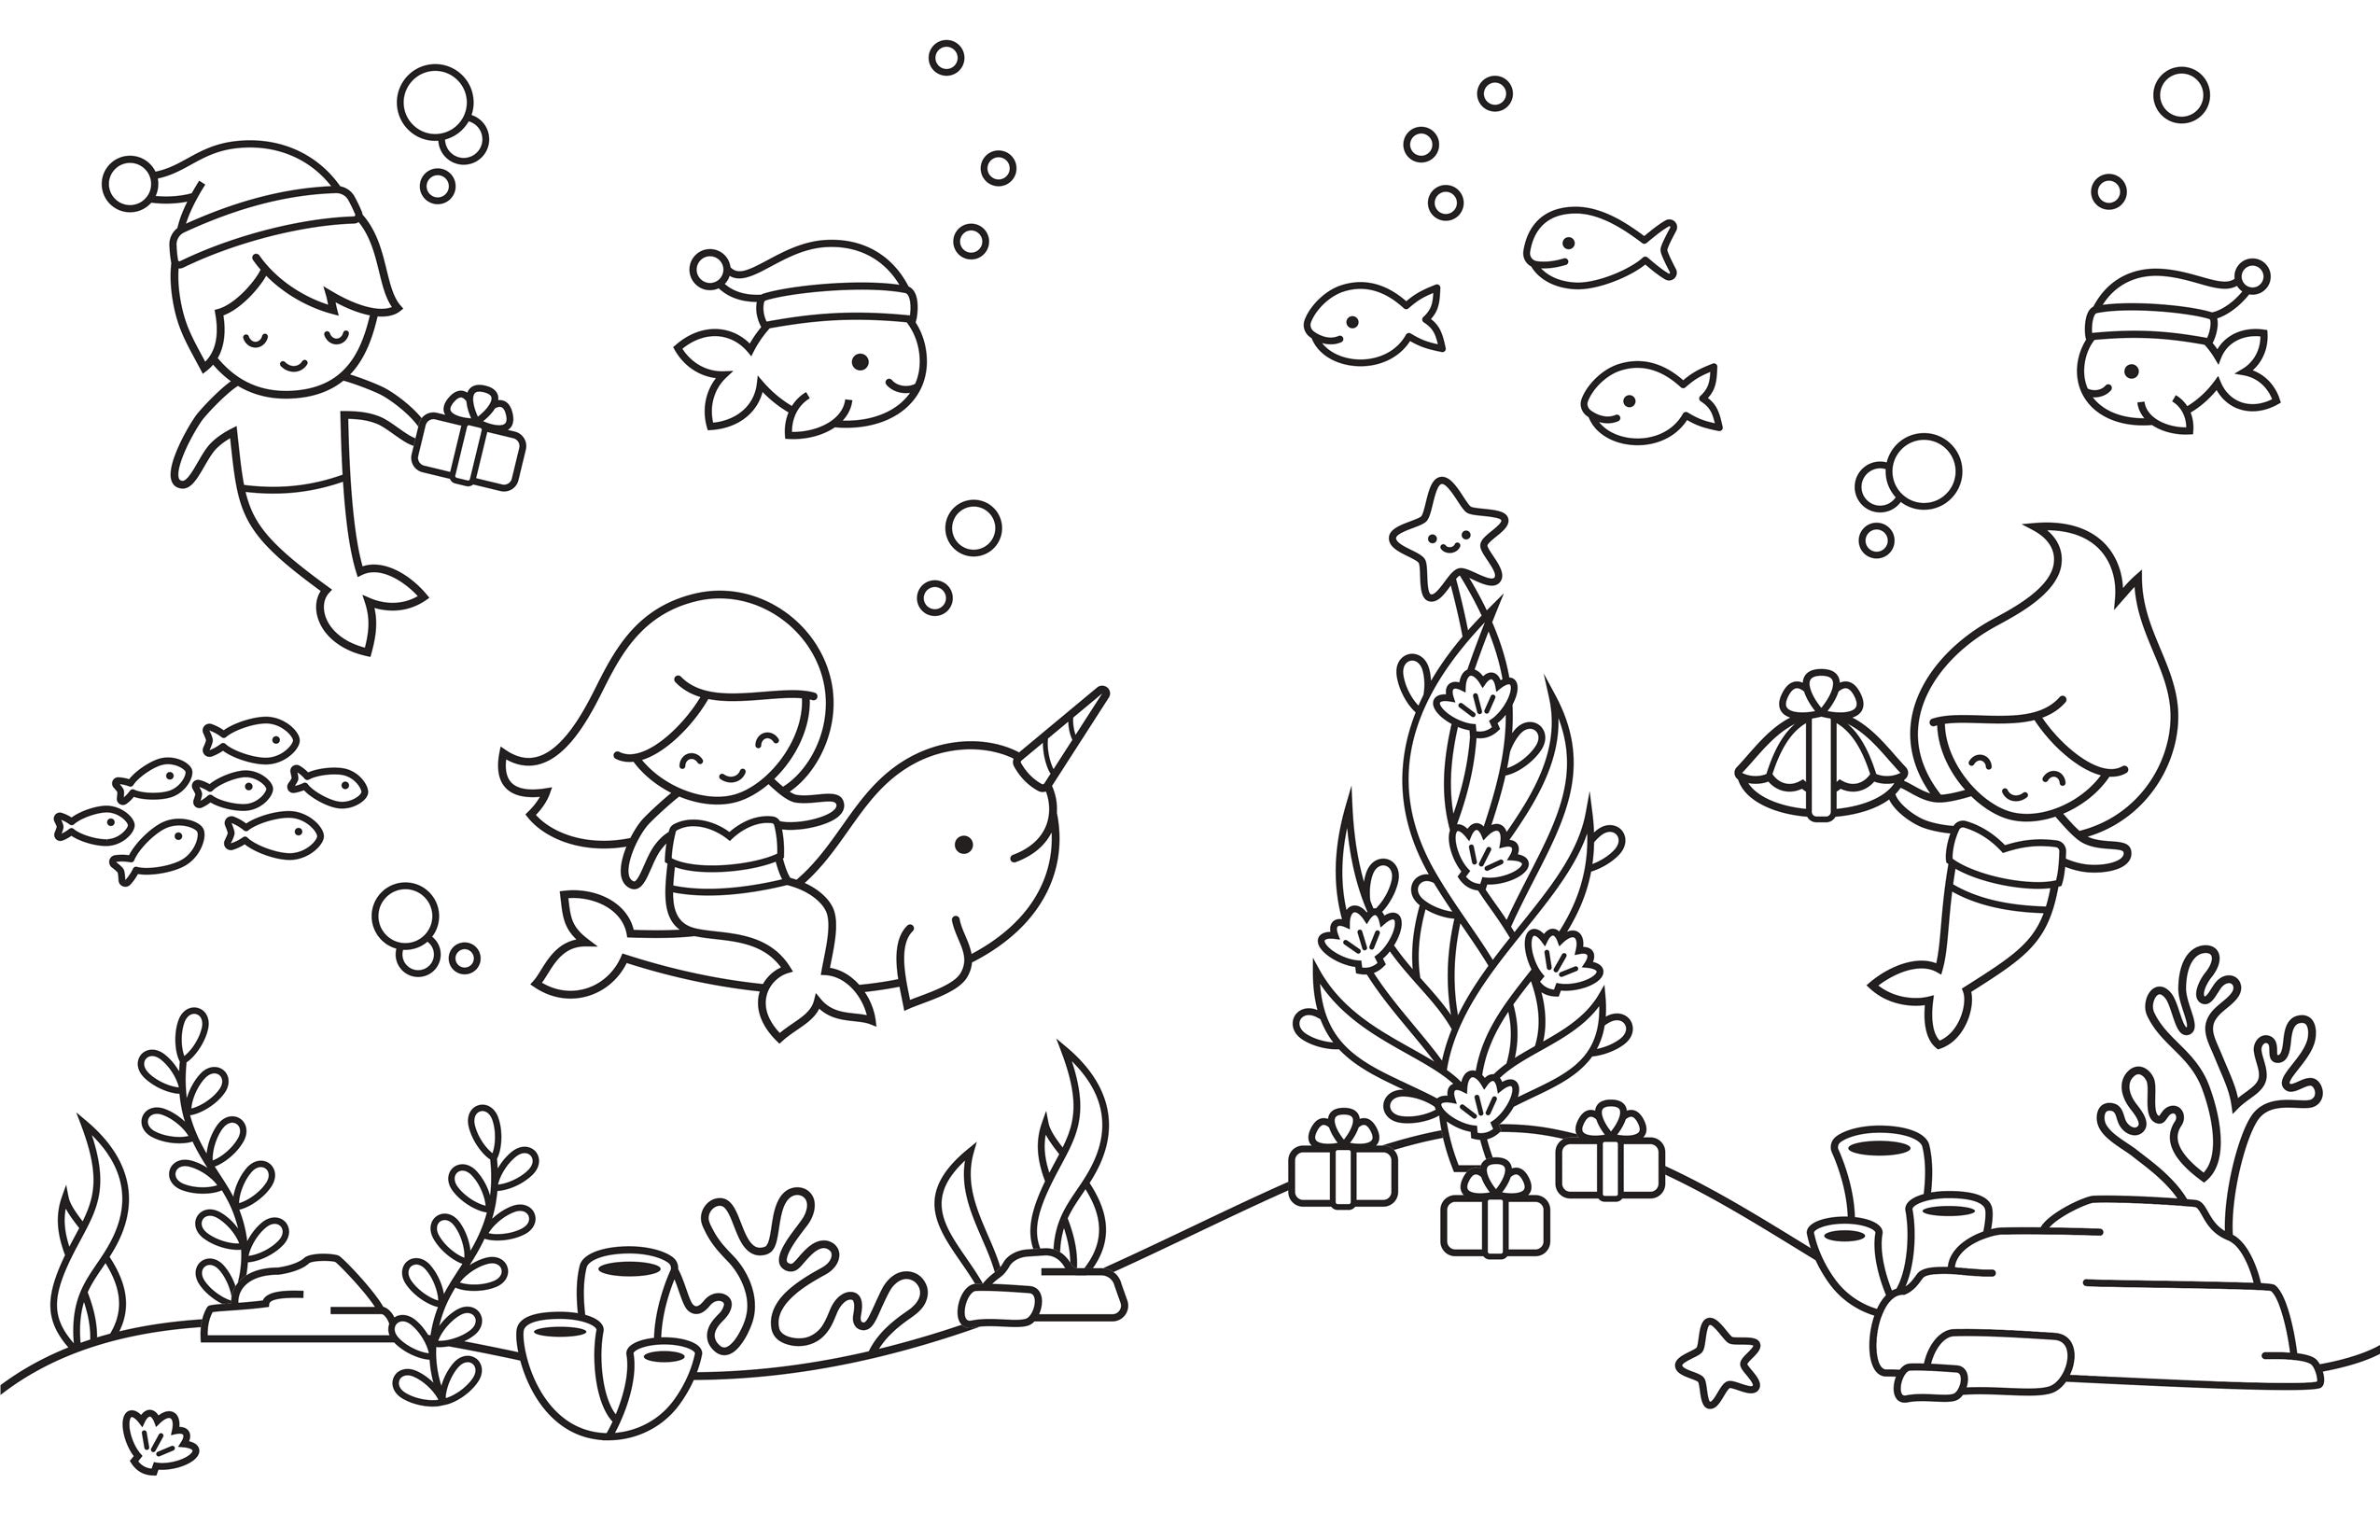 III. Different Types of Holiday-Themed Coloring Books